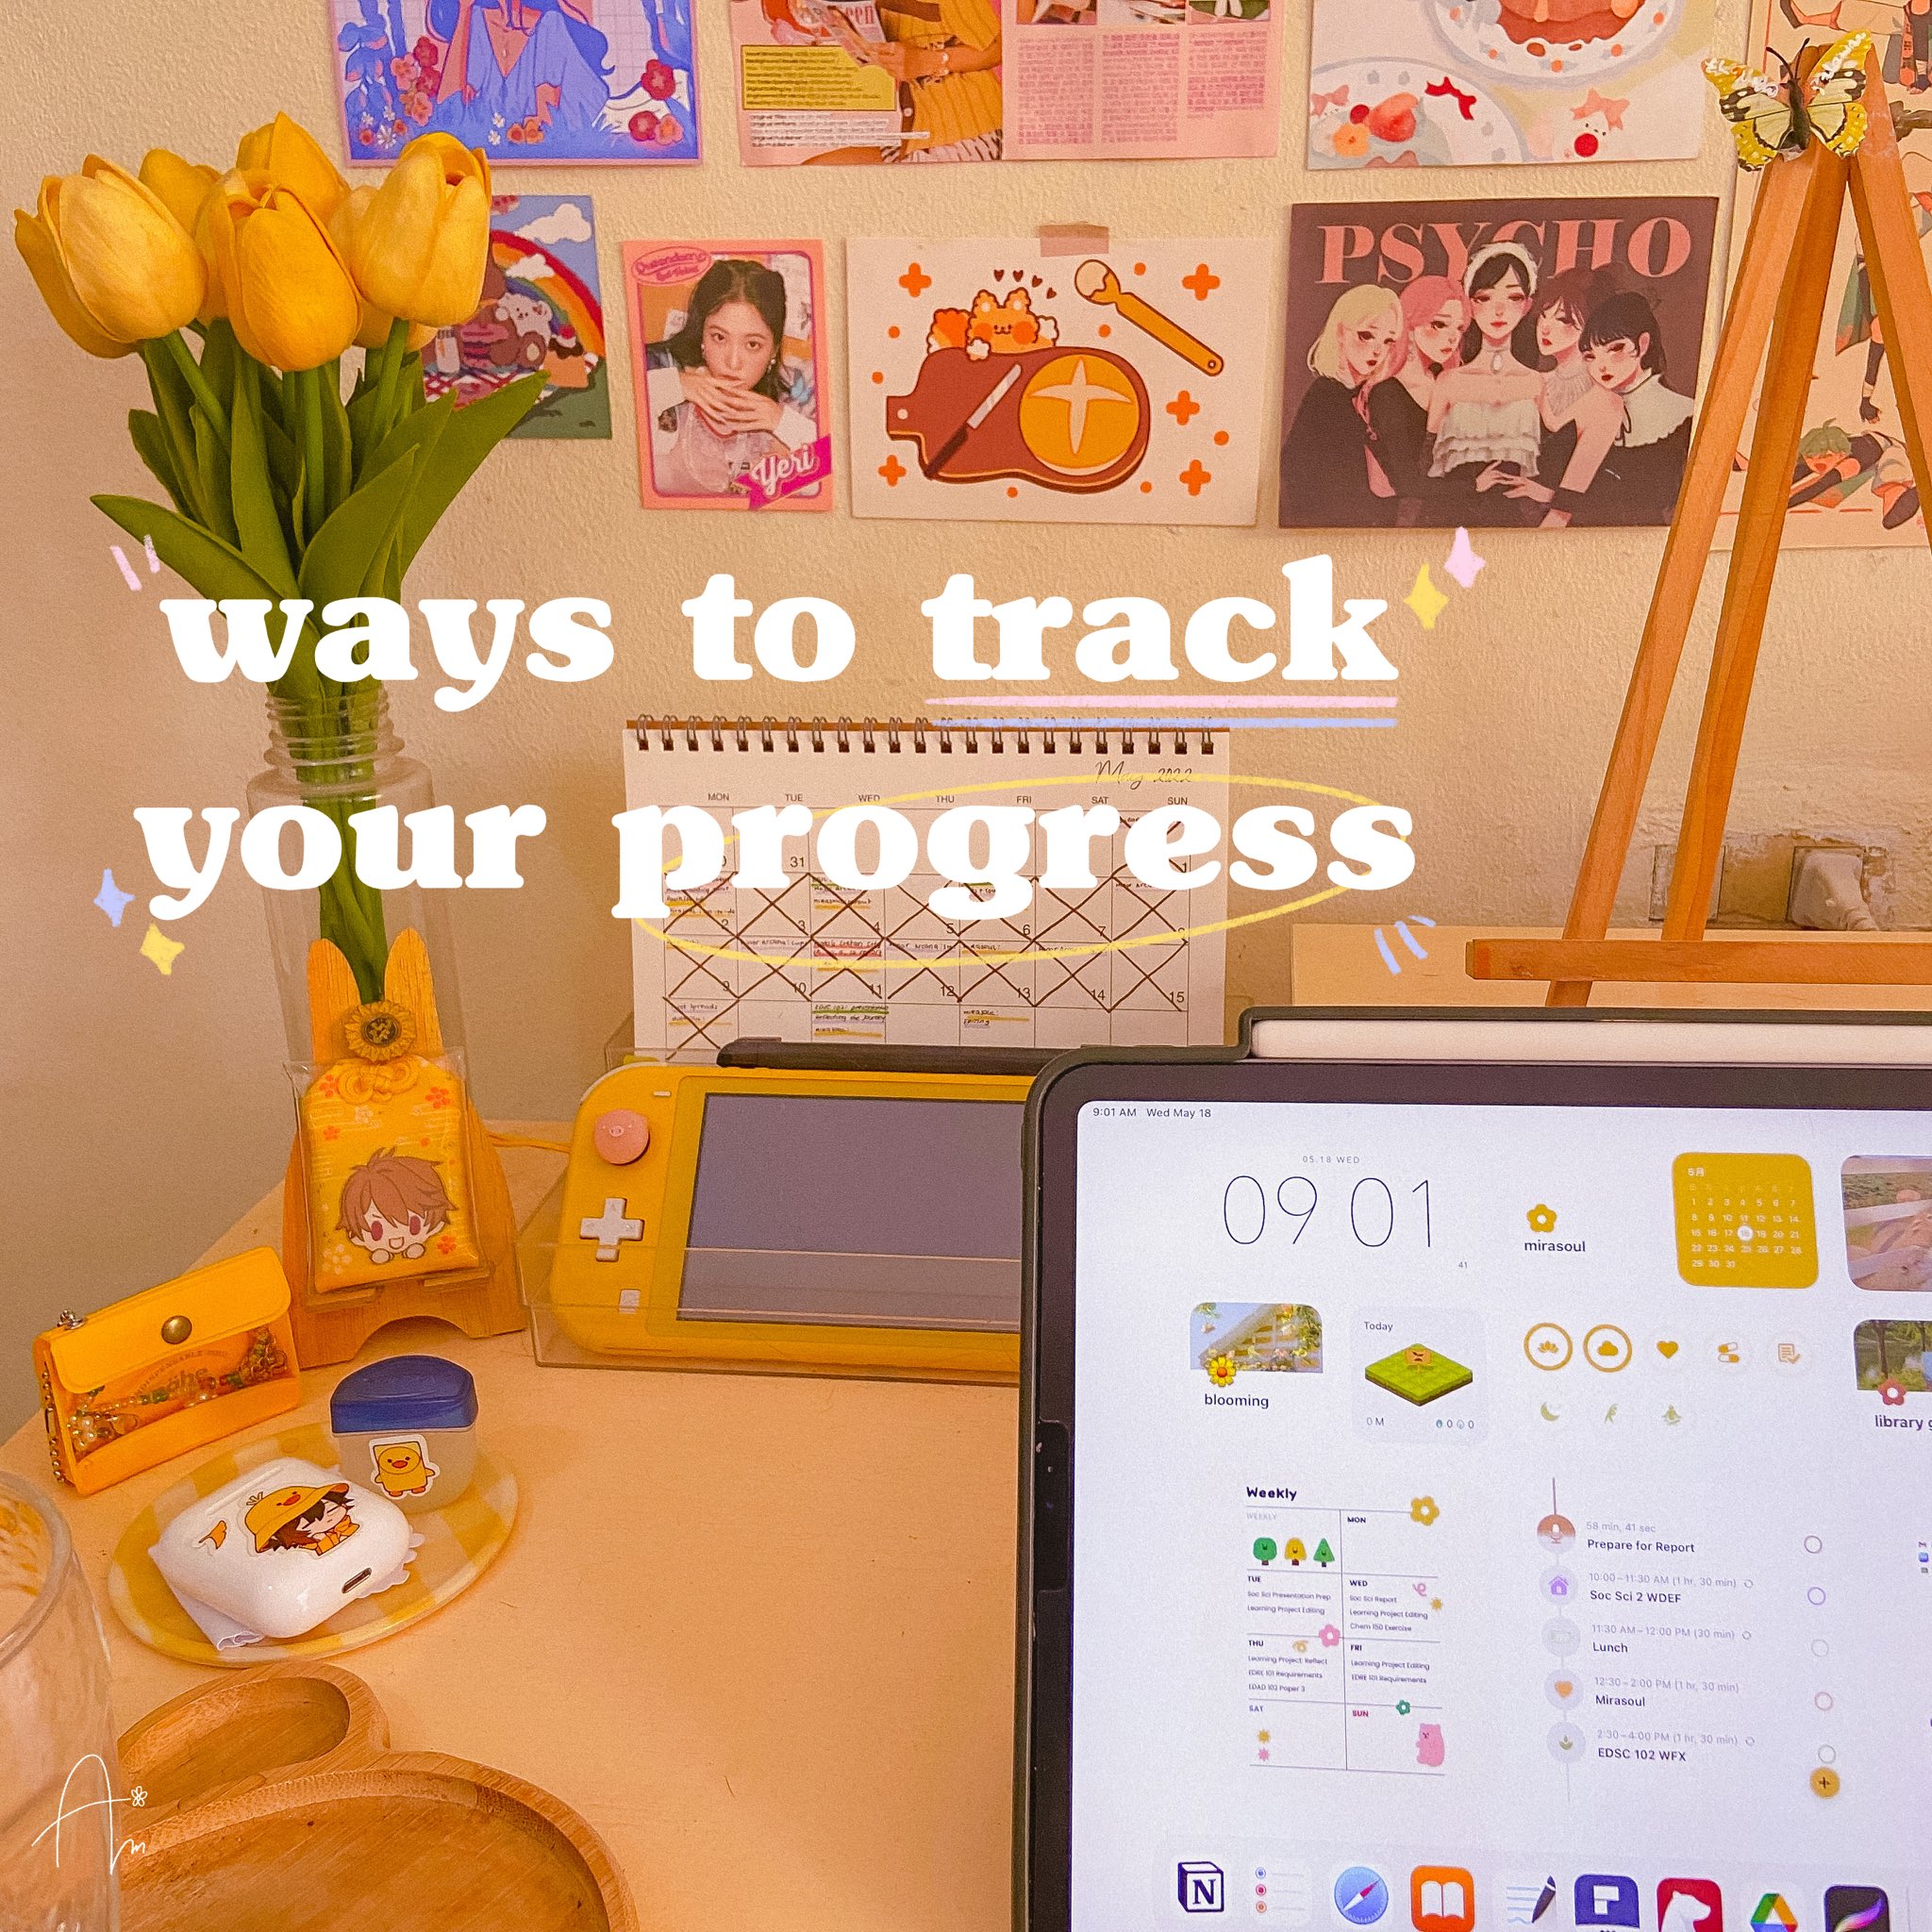 How to Get Back Your Life on a New Track